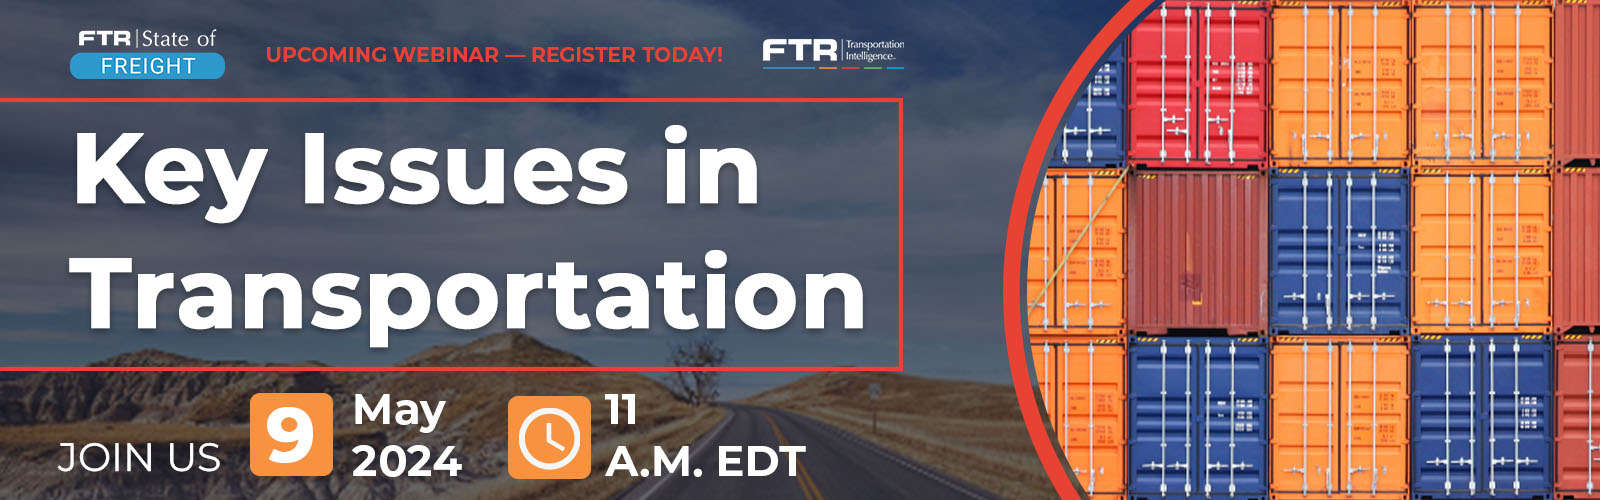 FTR_Key Issues webinar_May 2024_Landing Page_register today 